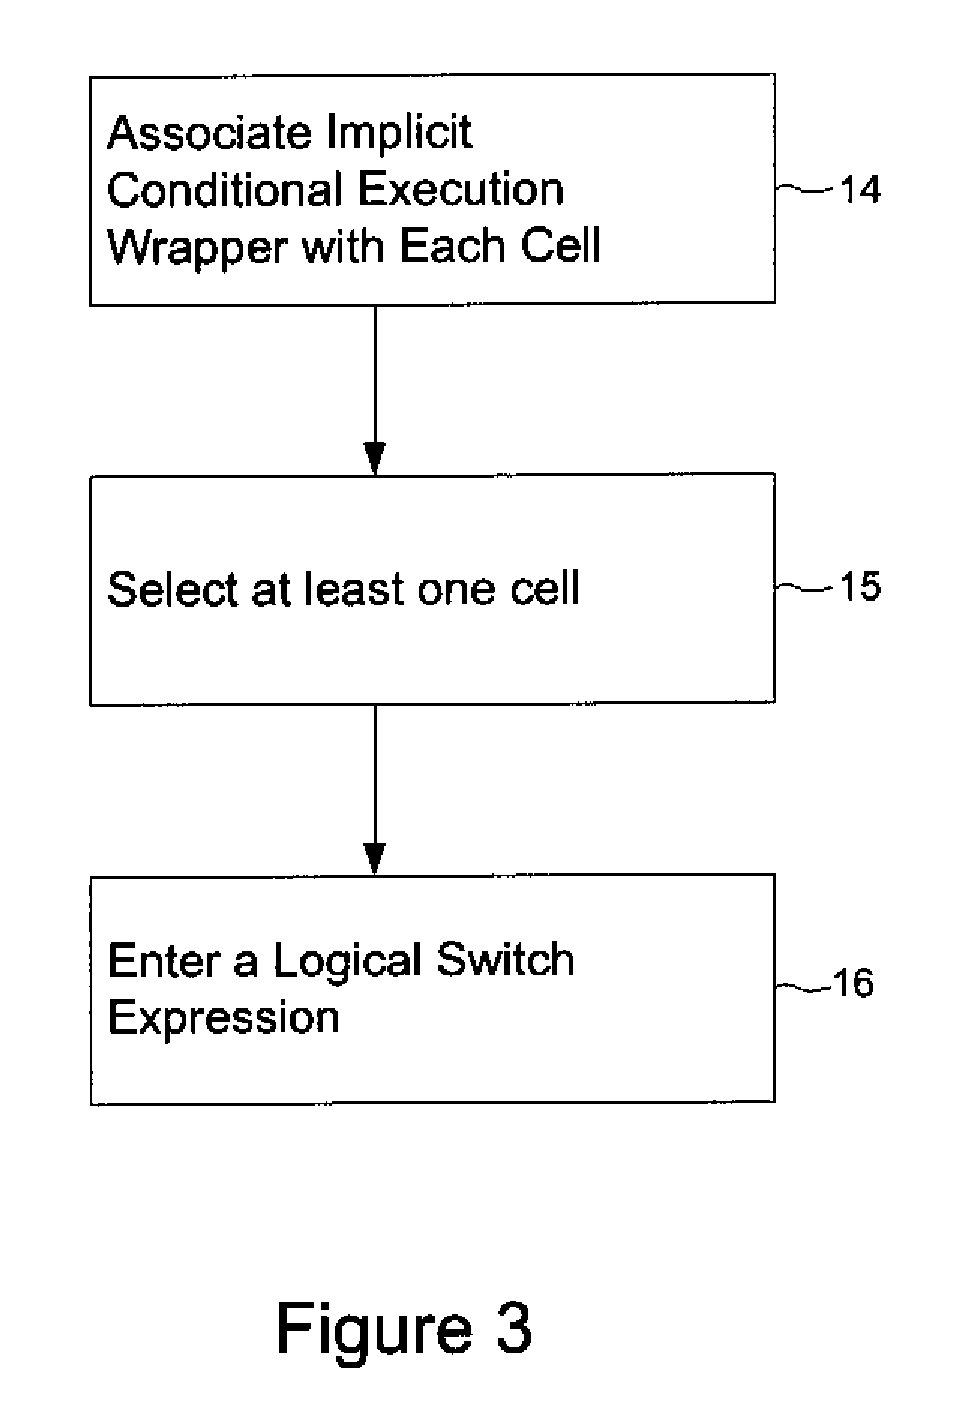 Conditional Cell Execution in Electronic Spreadsheets